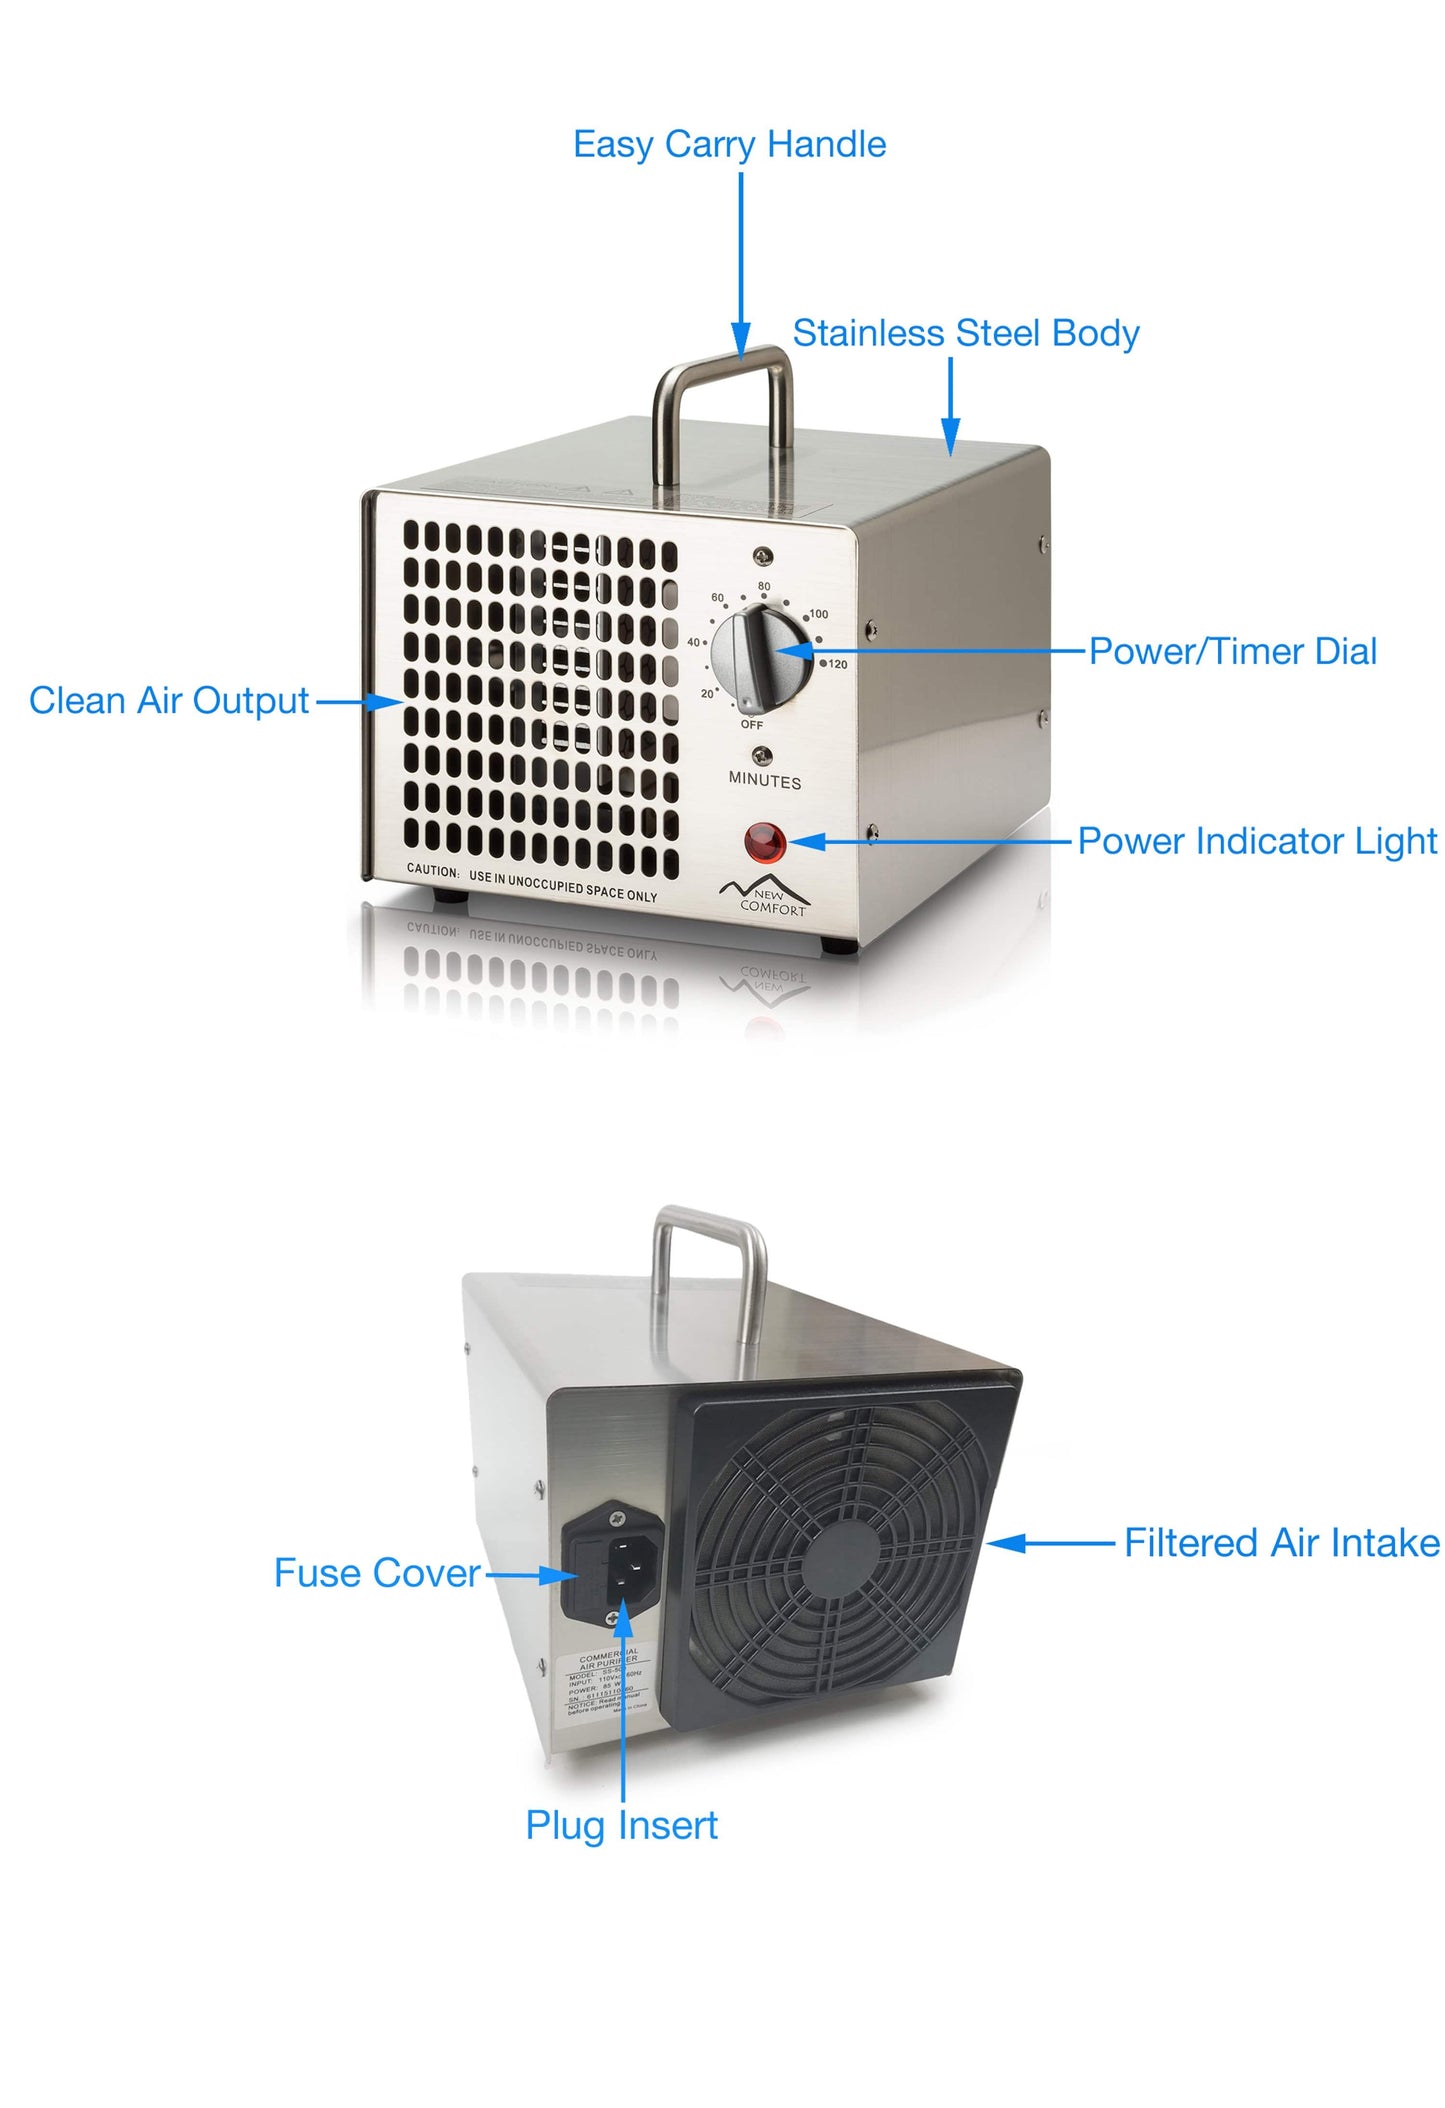 Silver New Comfort HE-500 Commercial Ozone Generator Air Purifier 8,500 mg/hr by Prolux